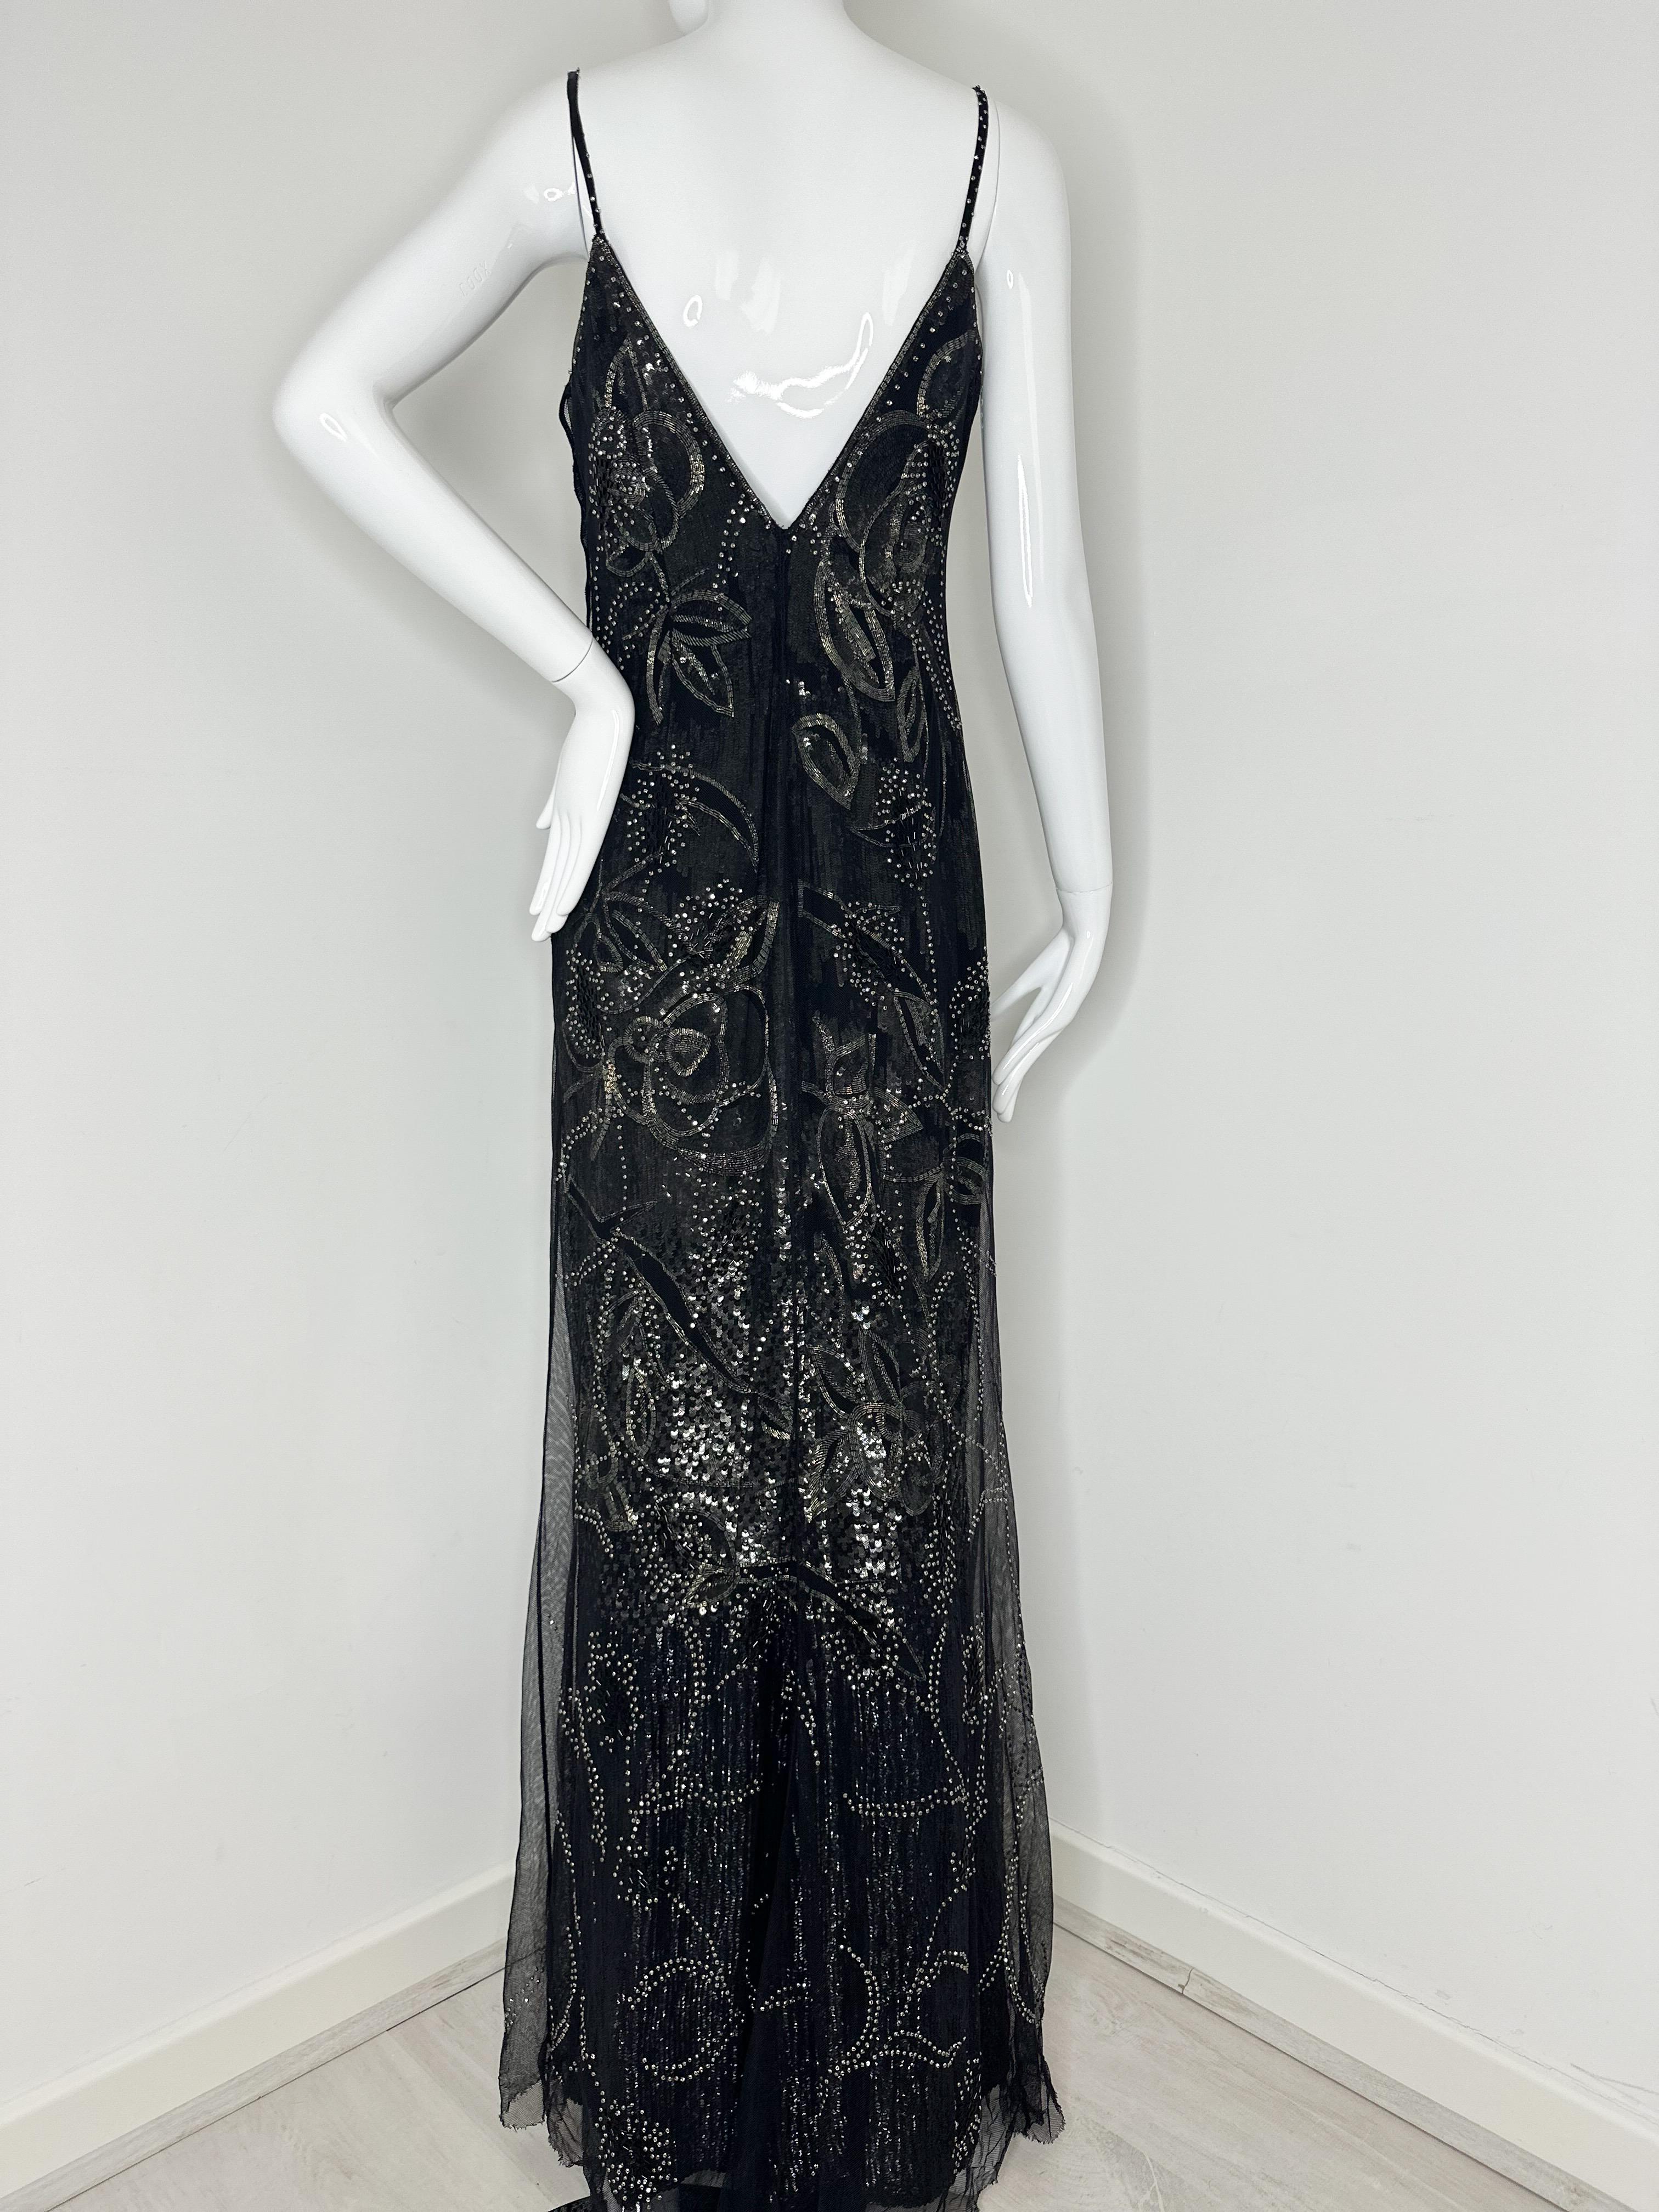 Ralph Lauren Collection (purple label) beaded sequin black and gold maxi dress/gown 

Absolutele luxury! Fully beaded and embellished gown with beaded tulle over the main layer of dress 
Zipper on the side 

Size 8

Good pre owned condition with